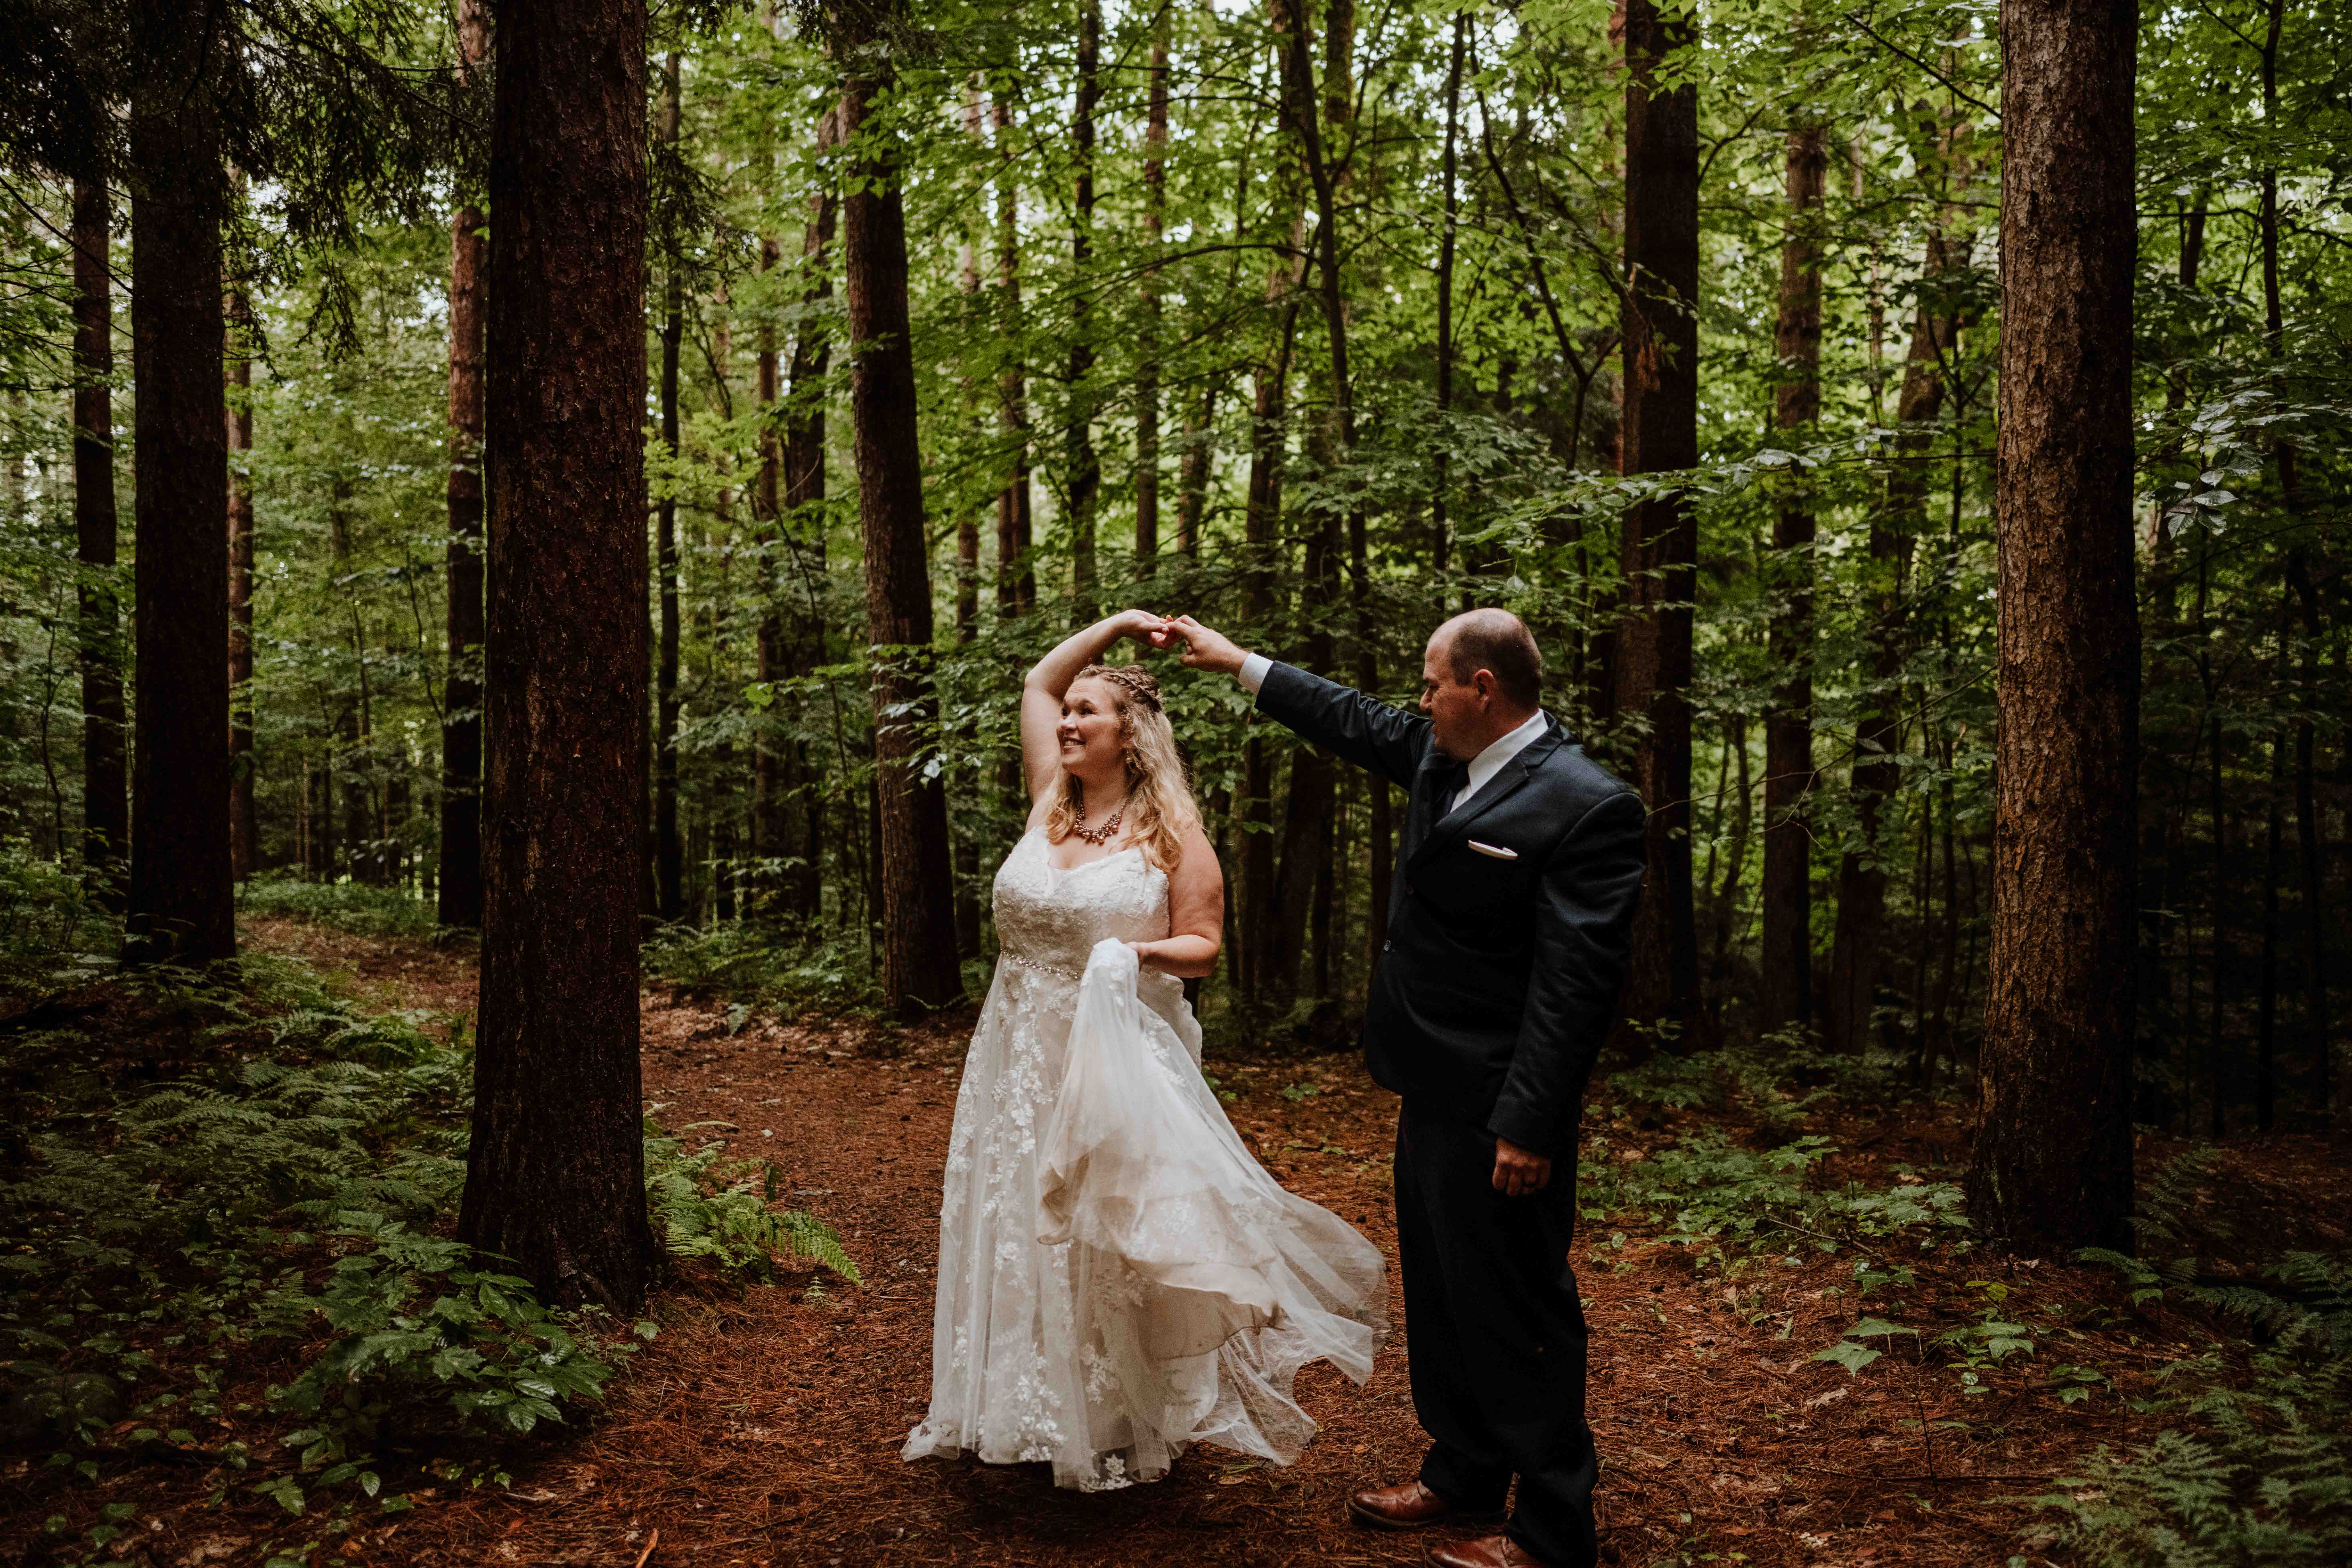 Newly eloped couple dancing in the forest together